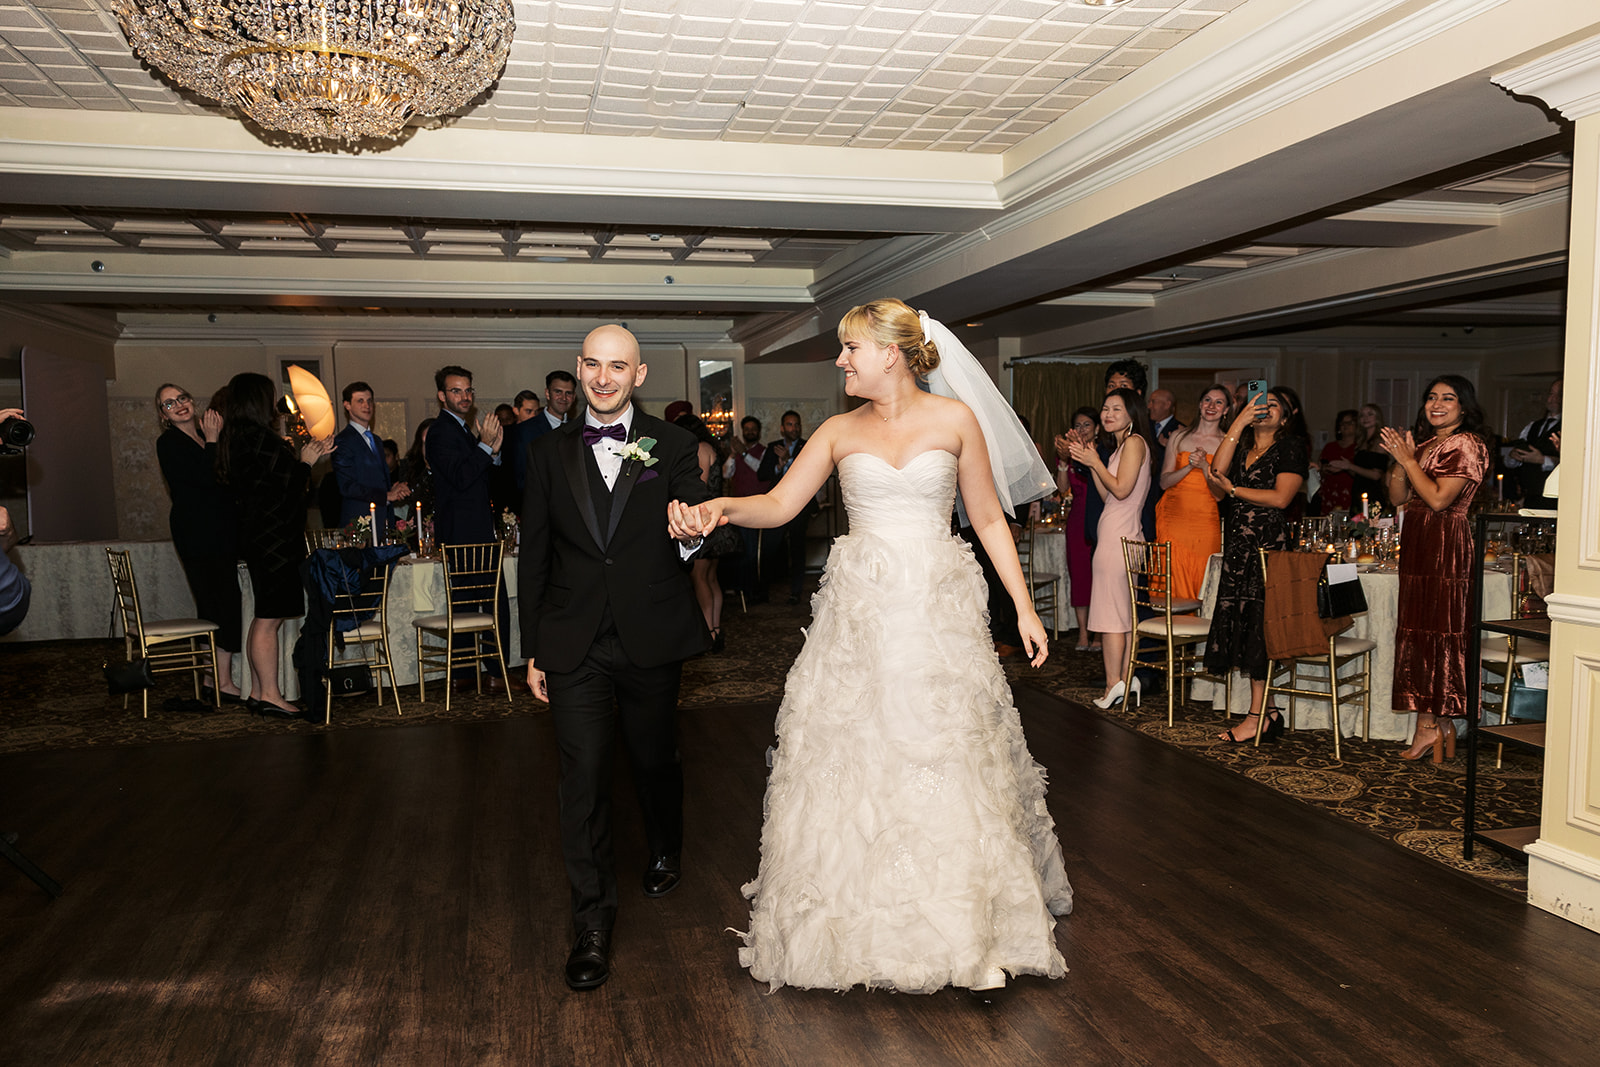 A bride and groom enter the dance floor of their reception at an Olde Mill Inn Wedding